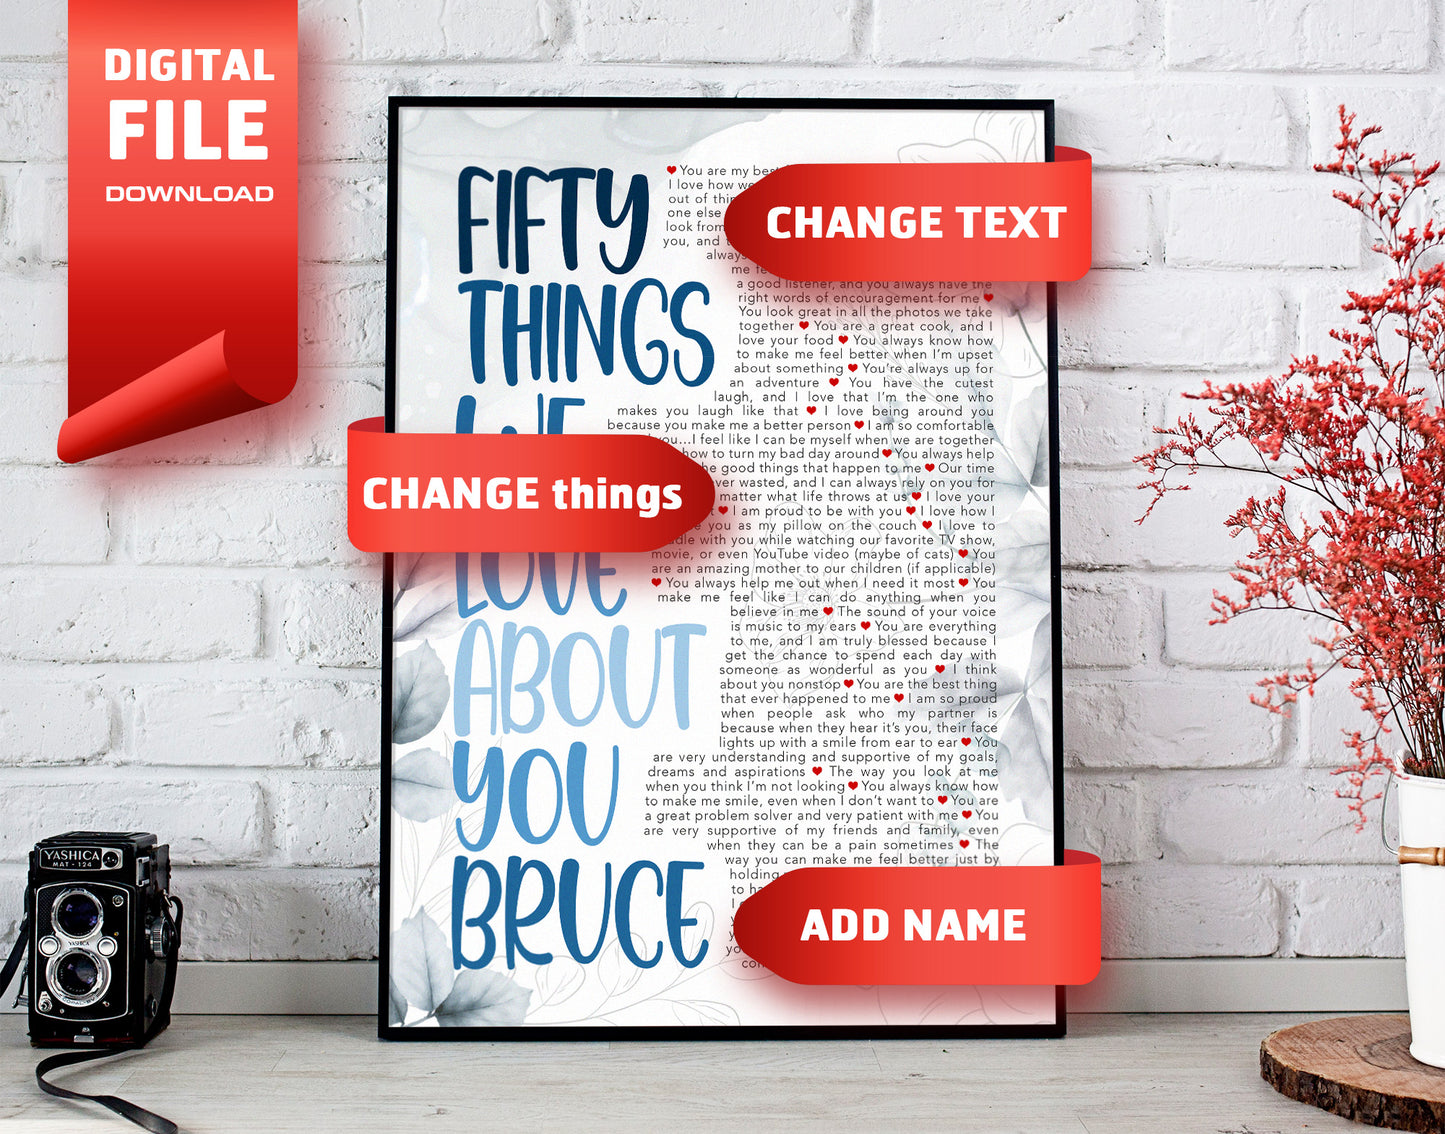 50th birthday gift - Fifty Things We Love About You - Personalized Name and Things text - Digital Canvas Print File